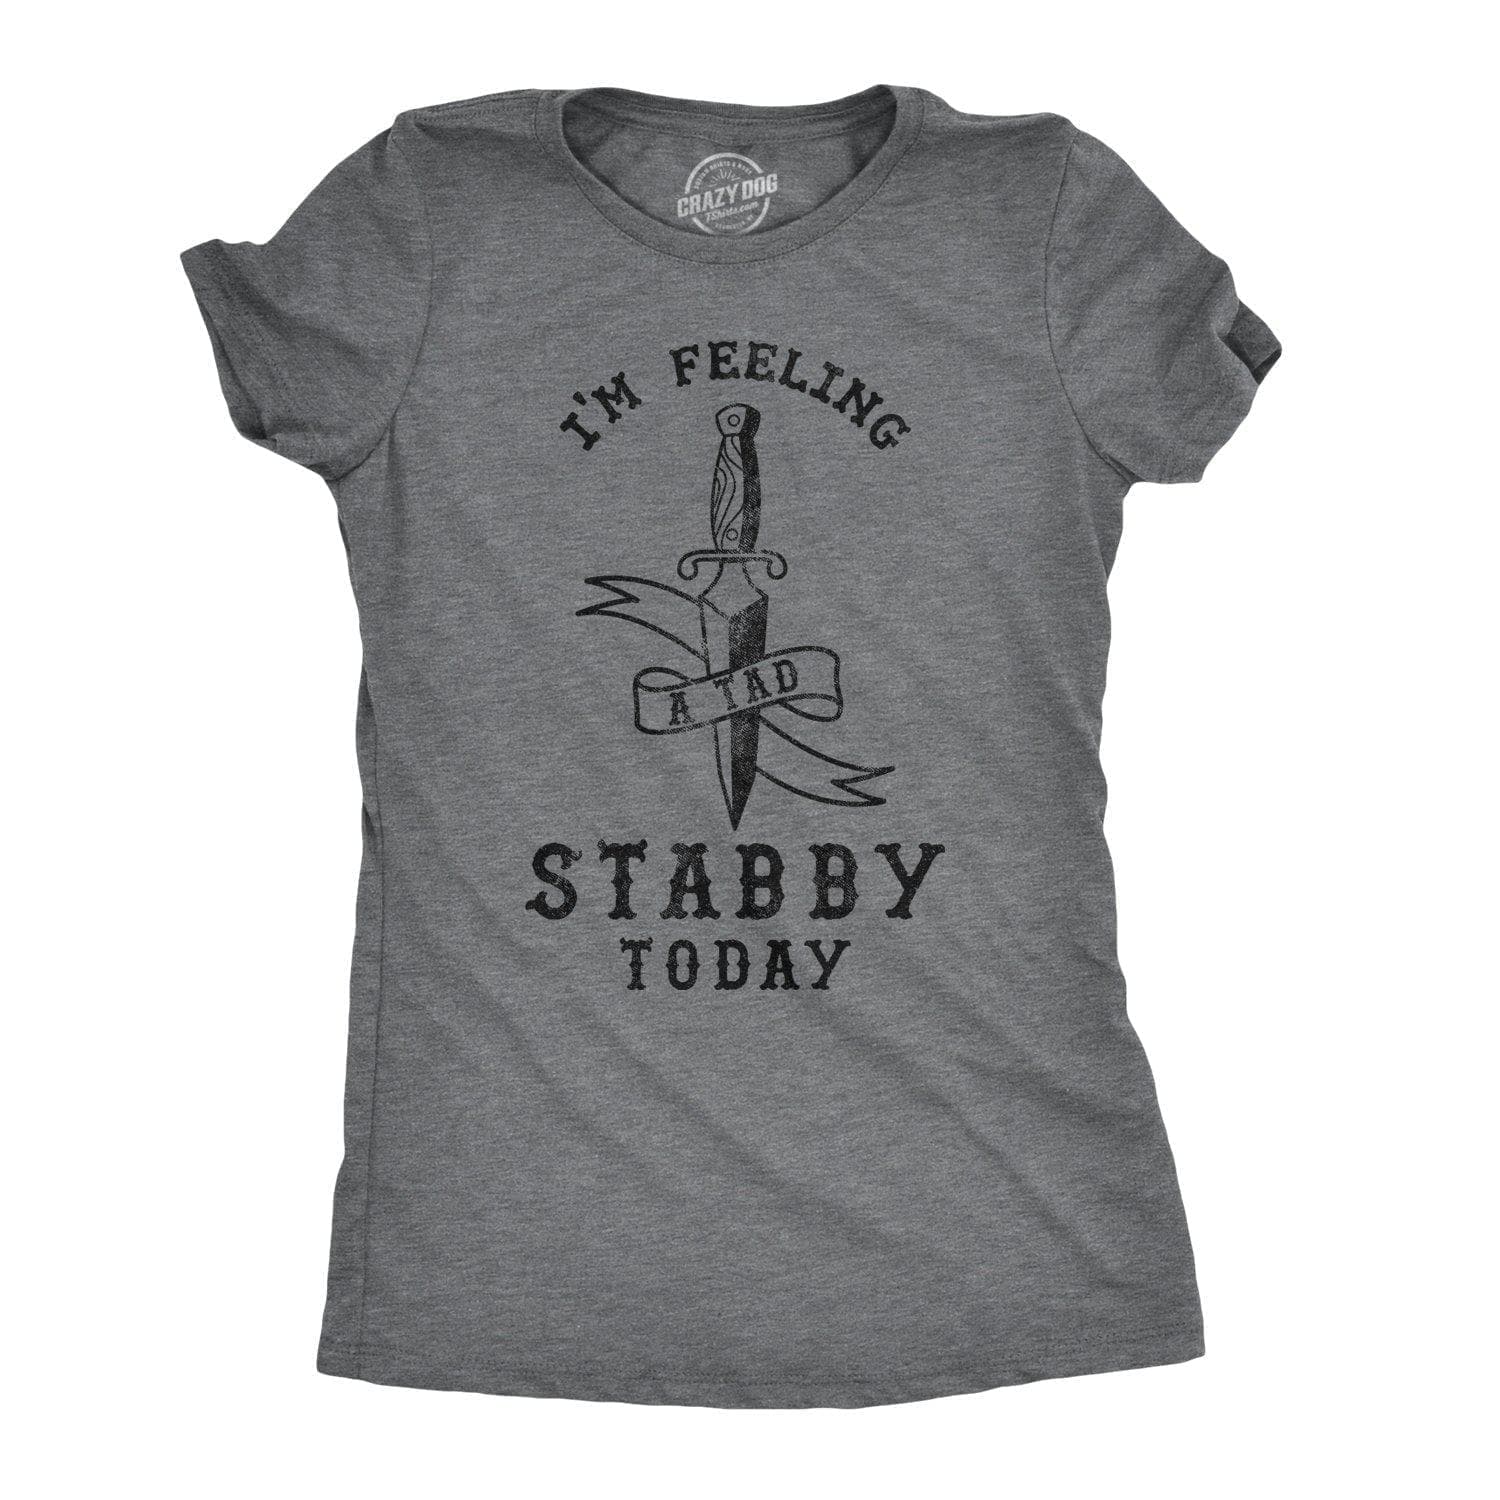 Feeling A Tad Stabby Today Women's Tshirt - Crazy Dog T-Shirts